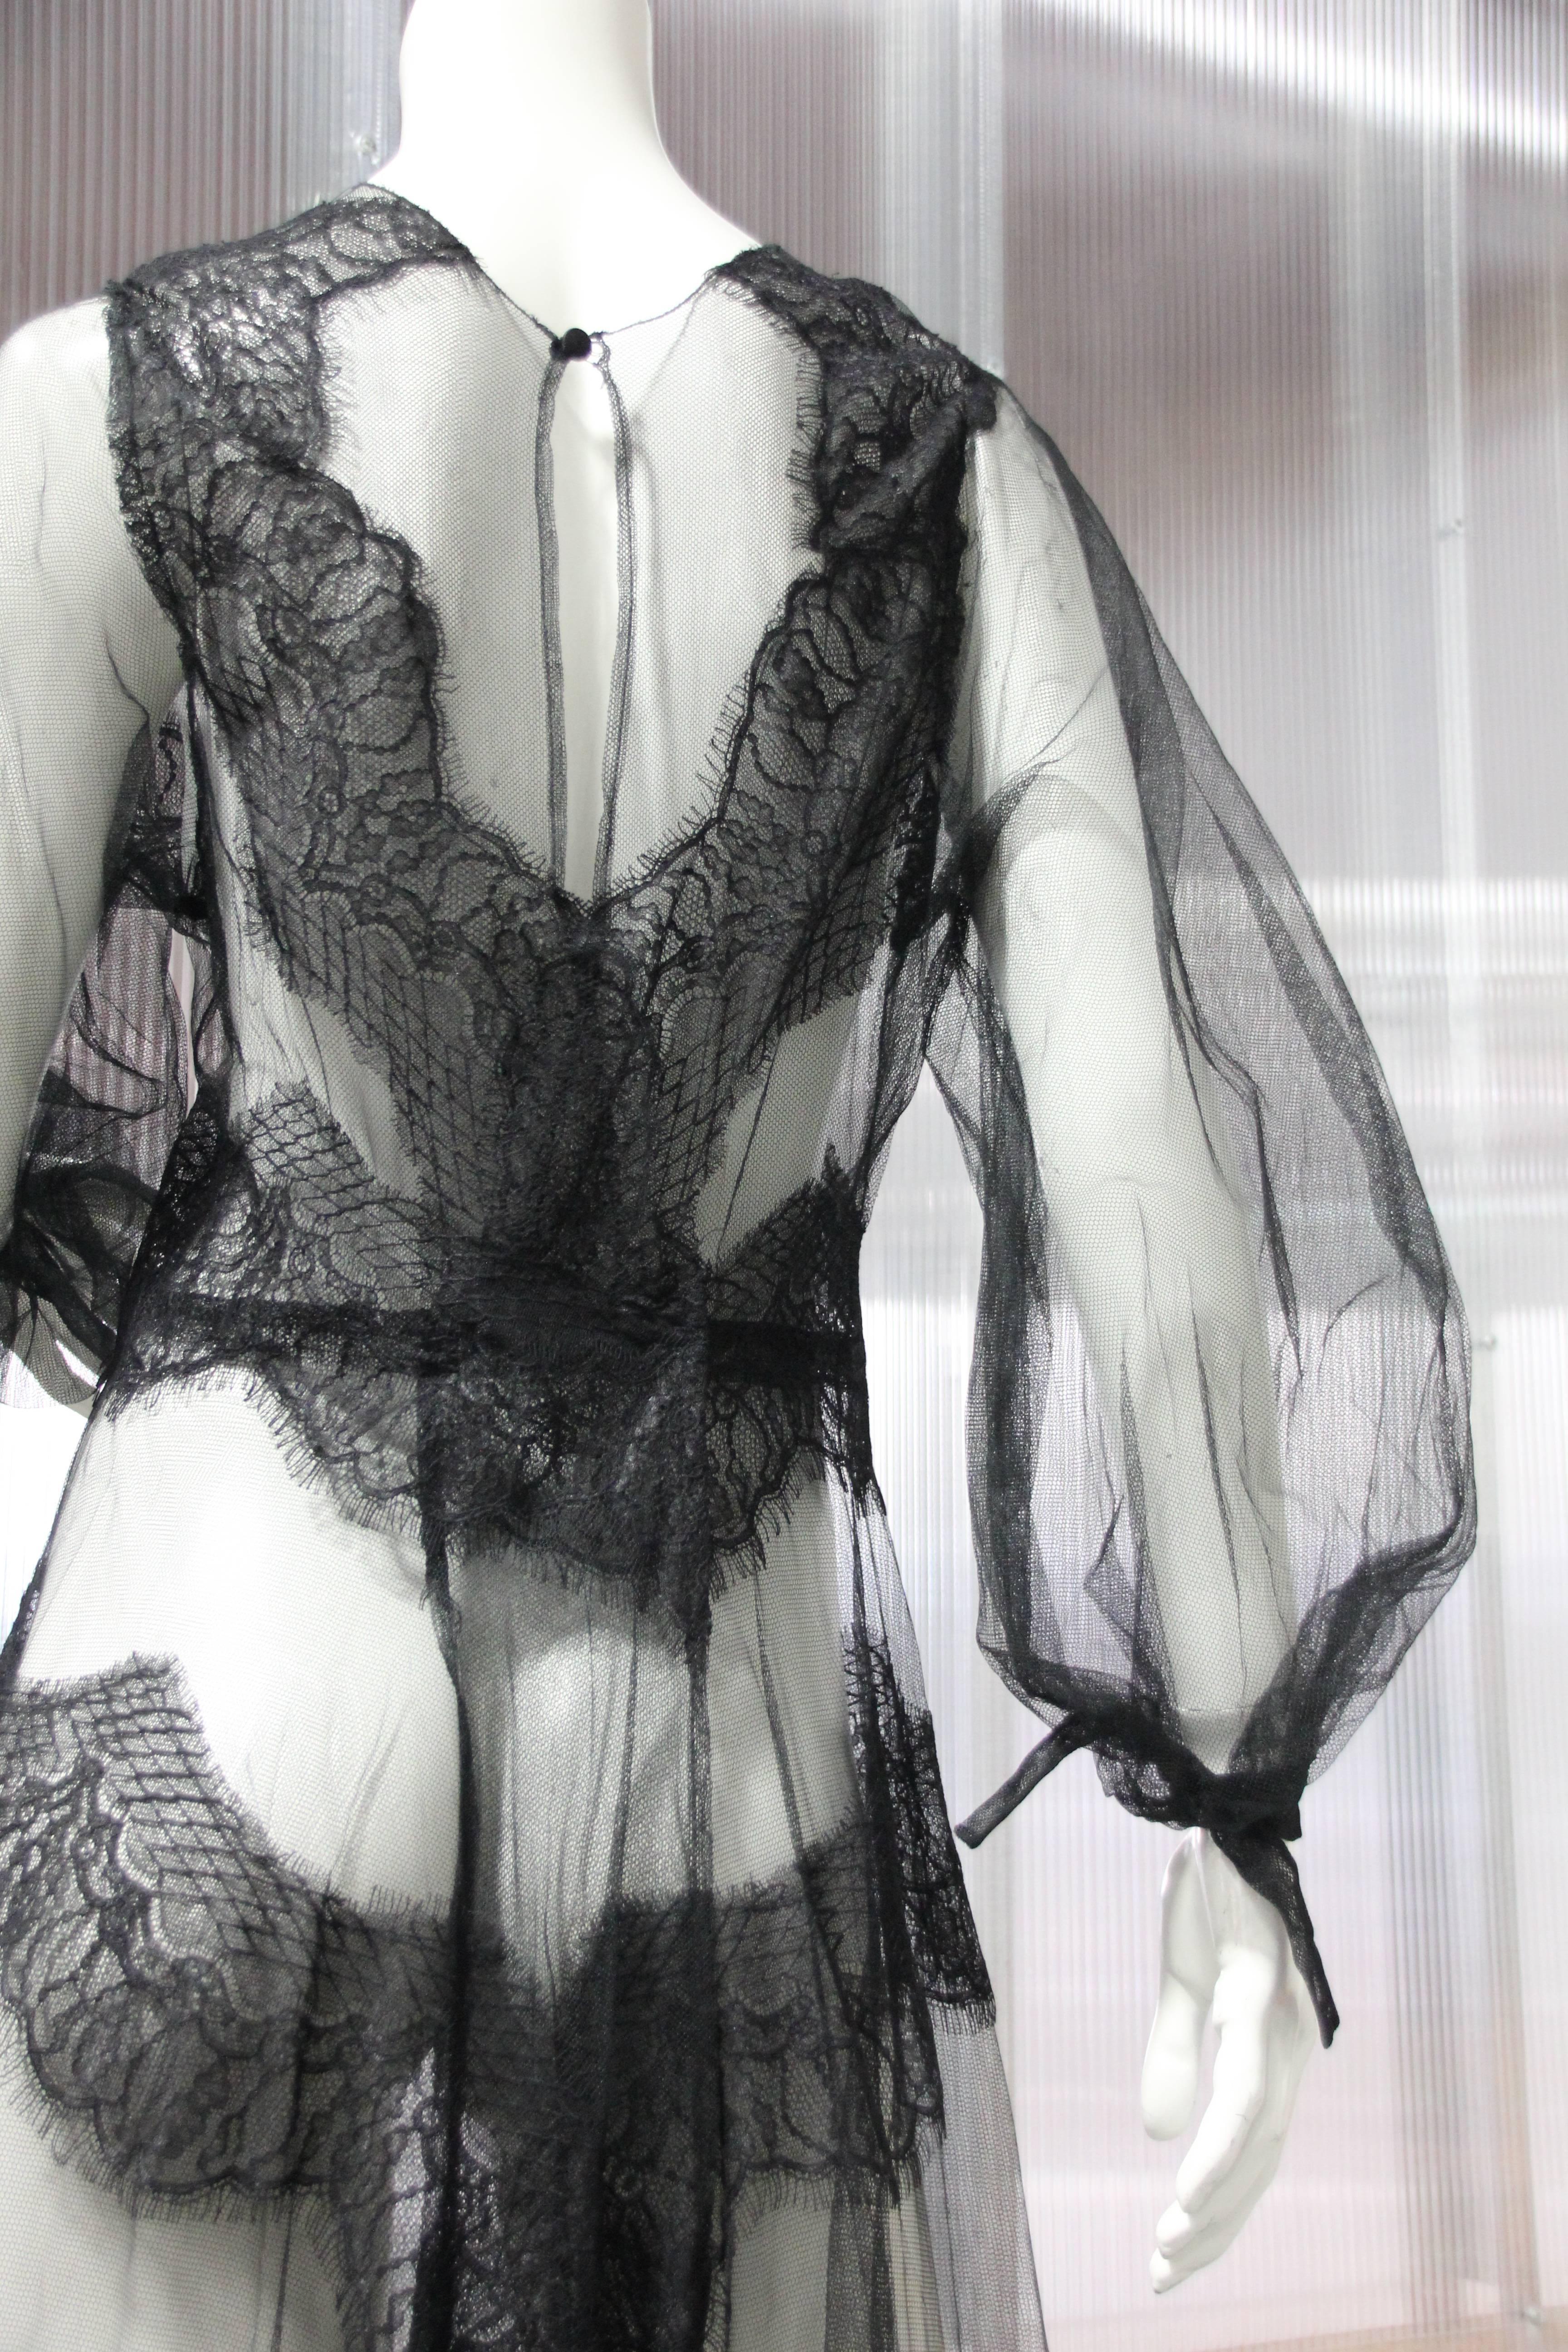 Black Net and Lace Peignoir with Balloon Sleeves and Deep-Cut Back Closure  1